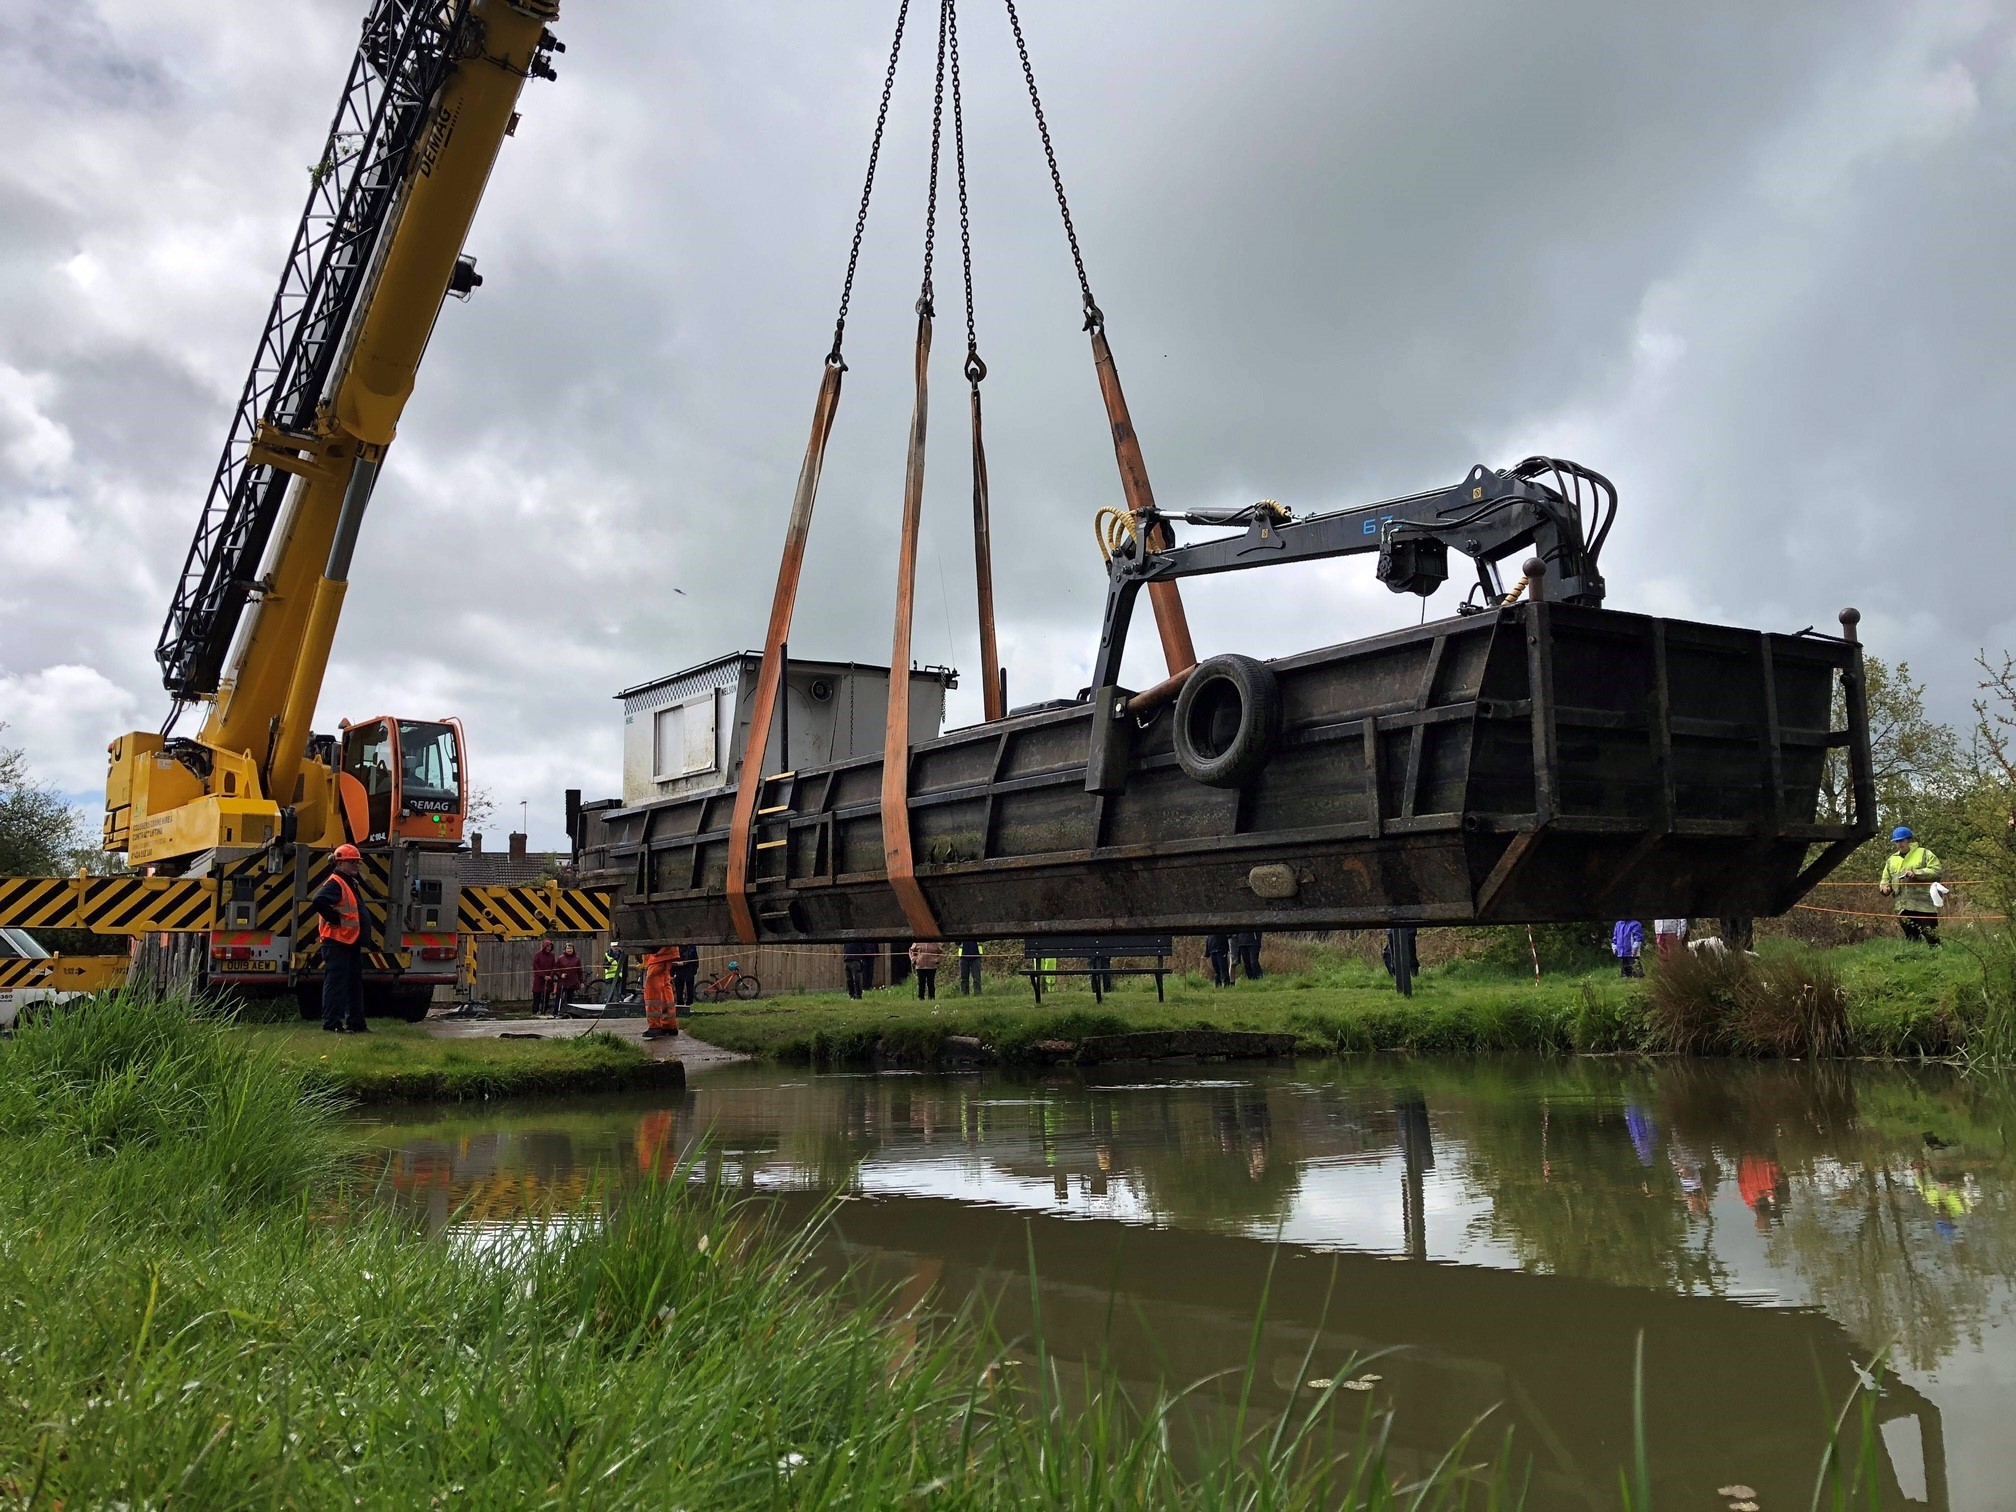 The dredger being lowered into the canal. Photo by Alex Hutchings